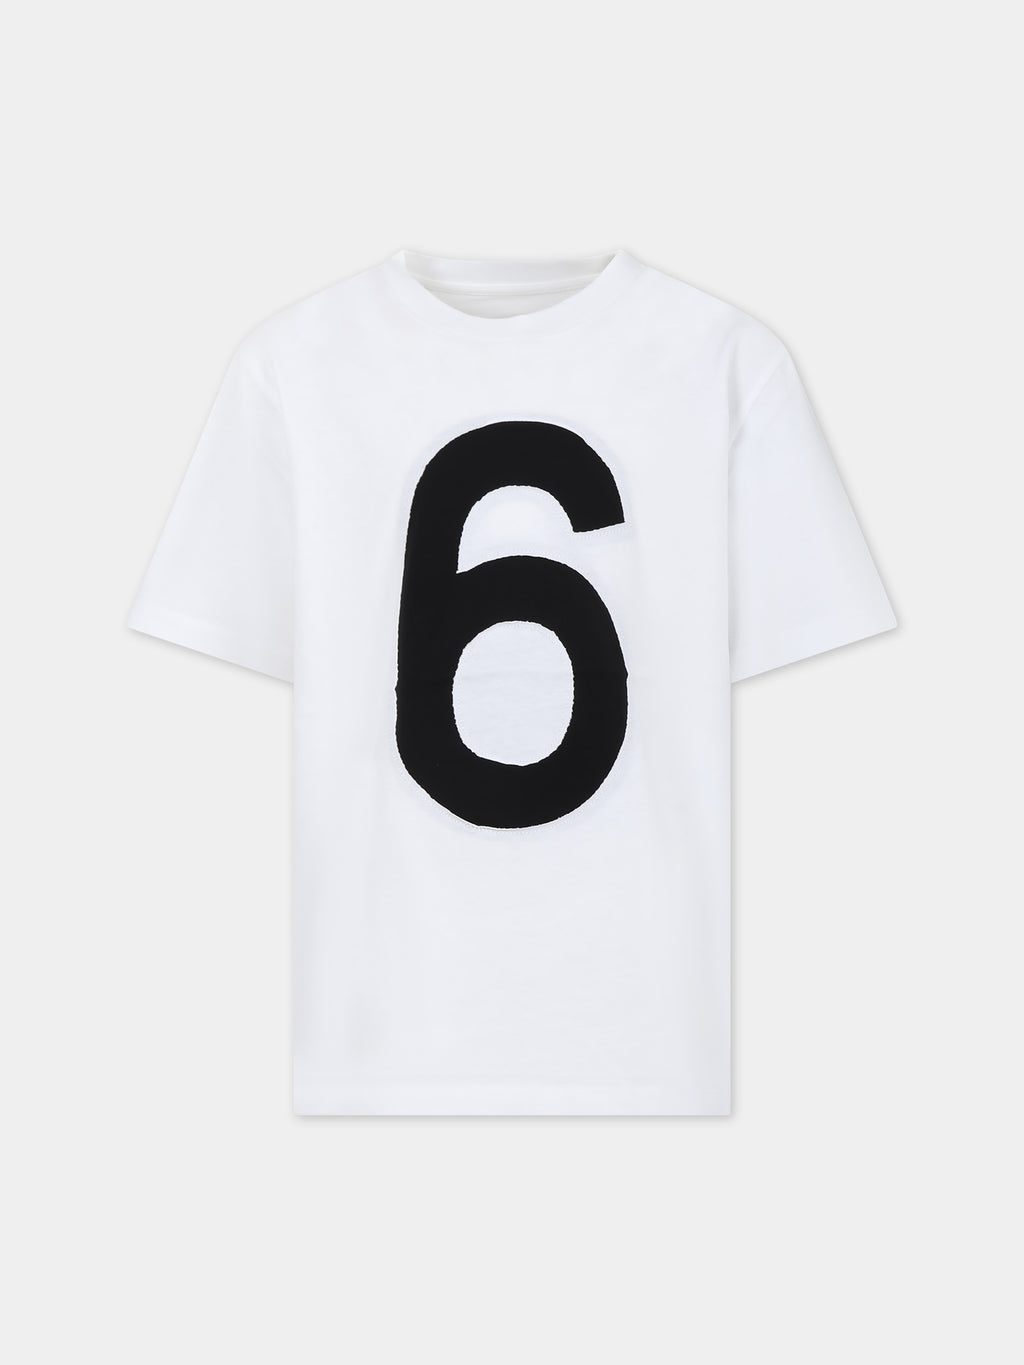 White t-shirt for kids with number 6